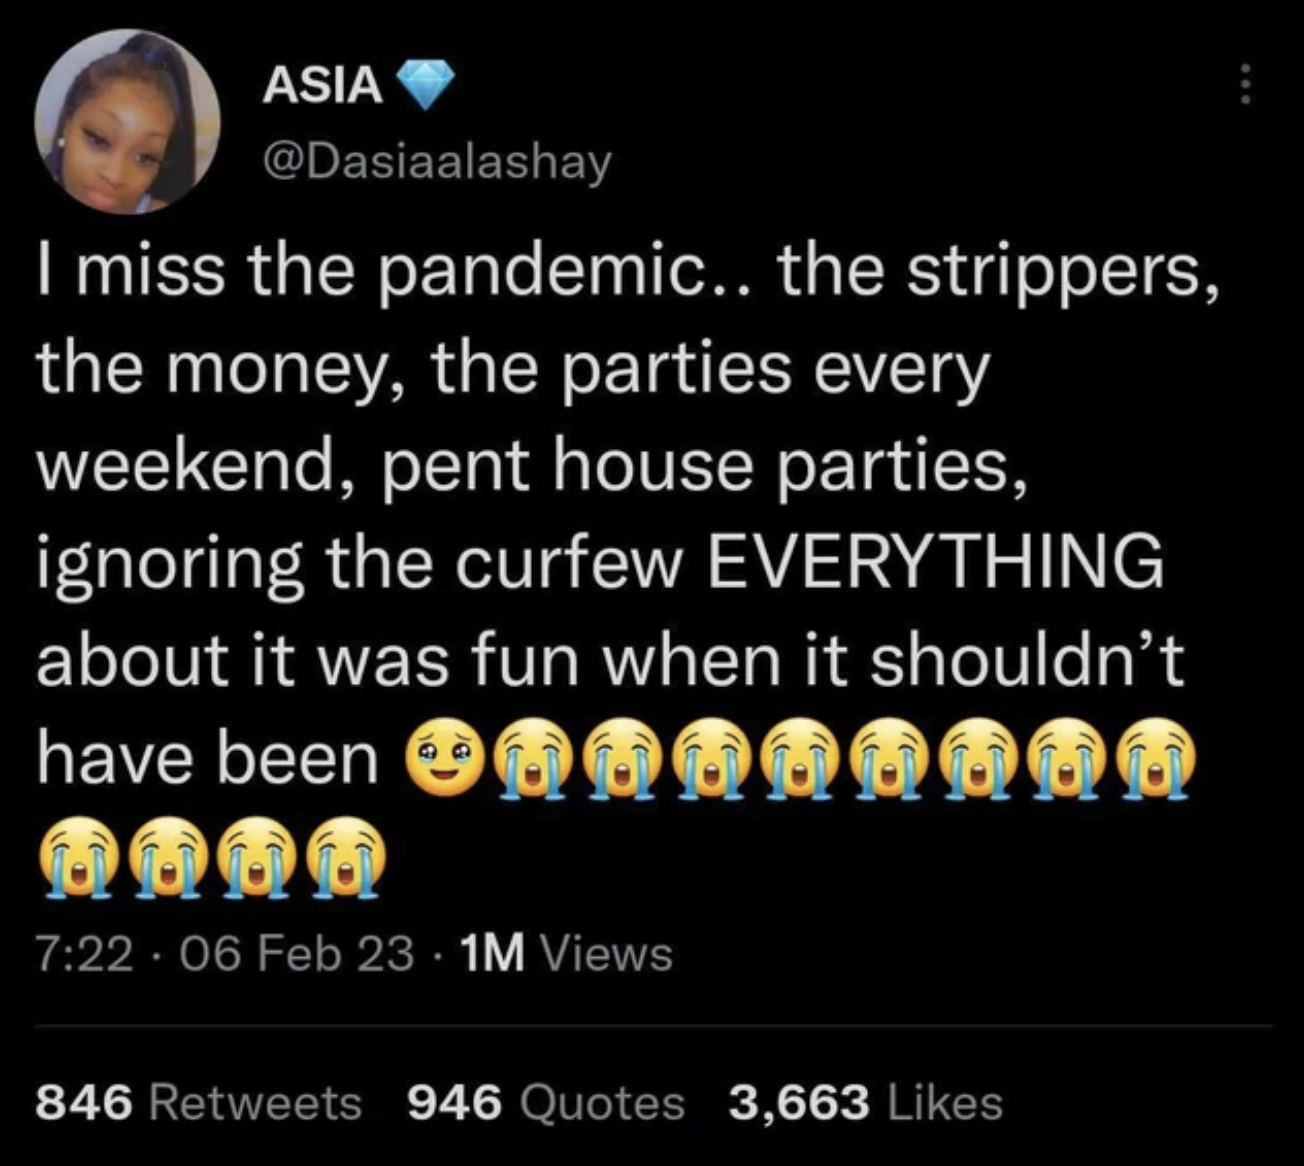 Facepalms - atmosphere - Asia I miss the pandemic.. the strippers, the money, the parties every weekend, pent house parties, ignoring the curfew Everything about it was fun when it shouldn't have